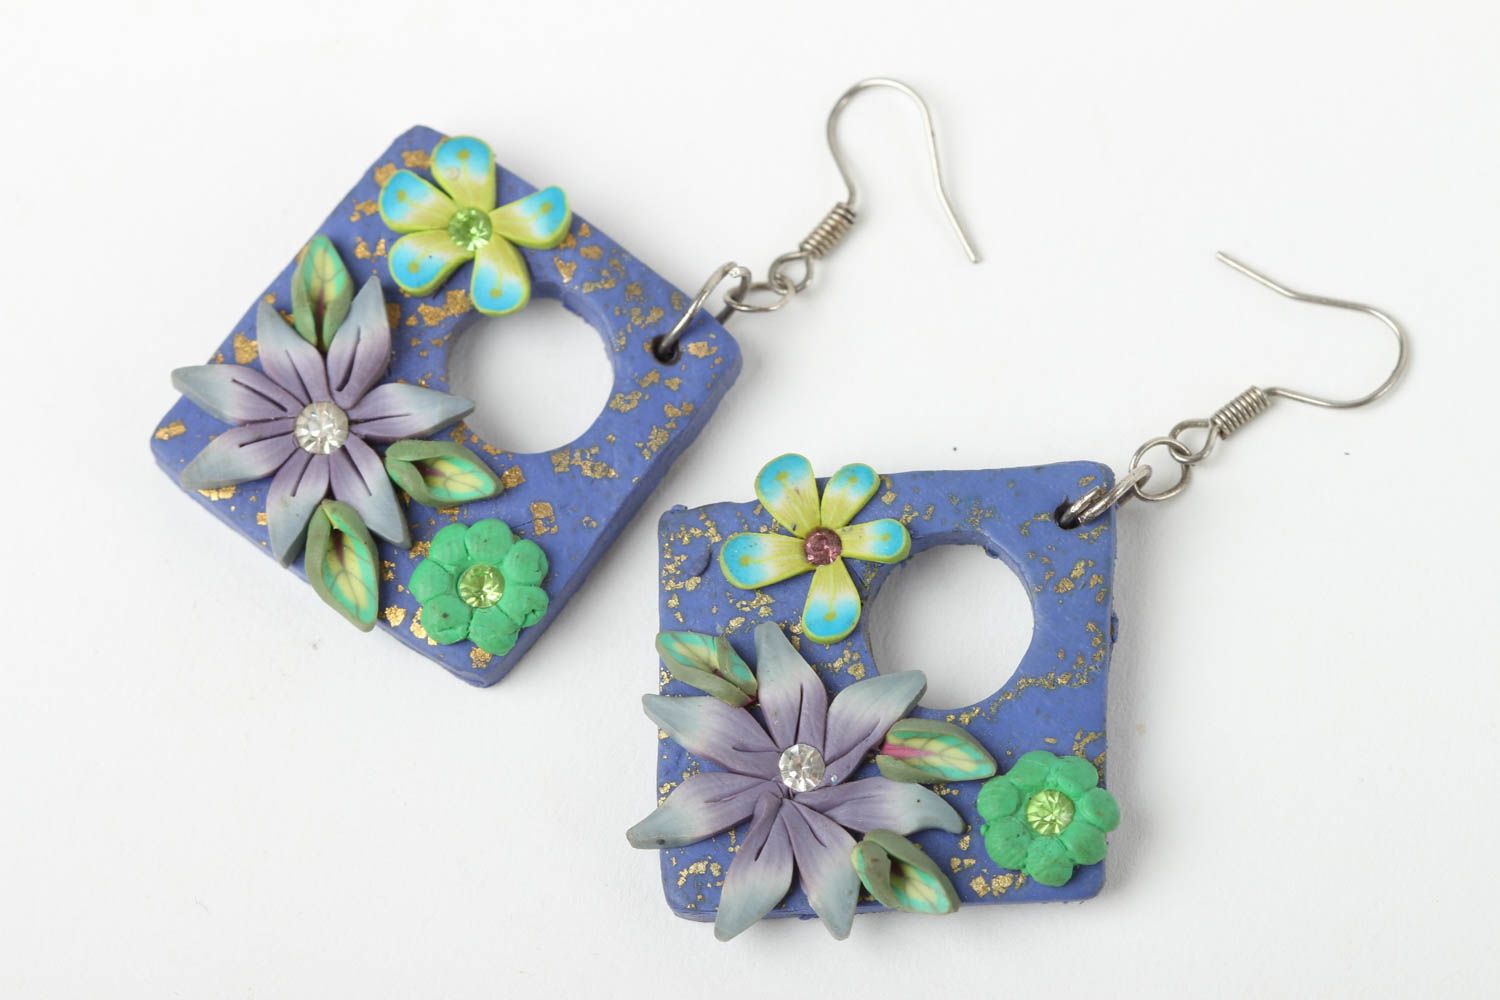 Plastic earrings handmade polymer clay earrings with charms designer jewelry photo 2